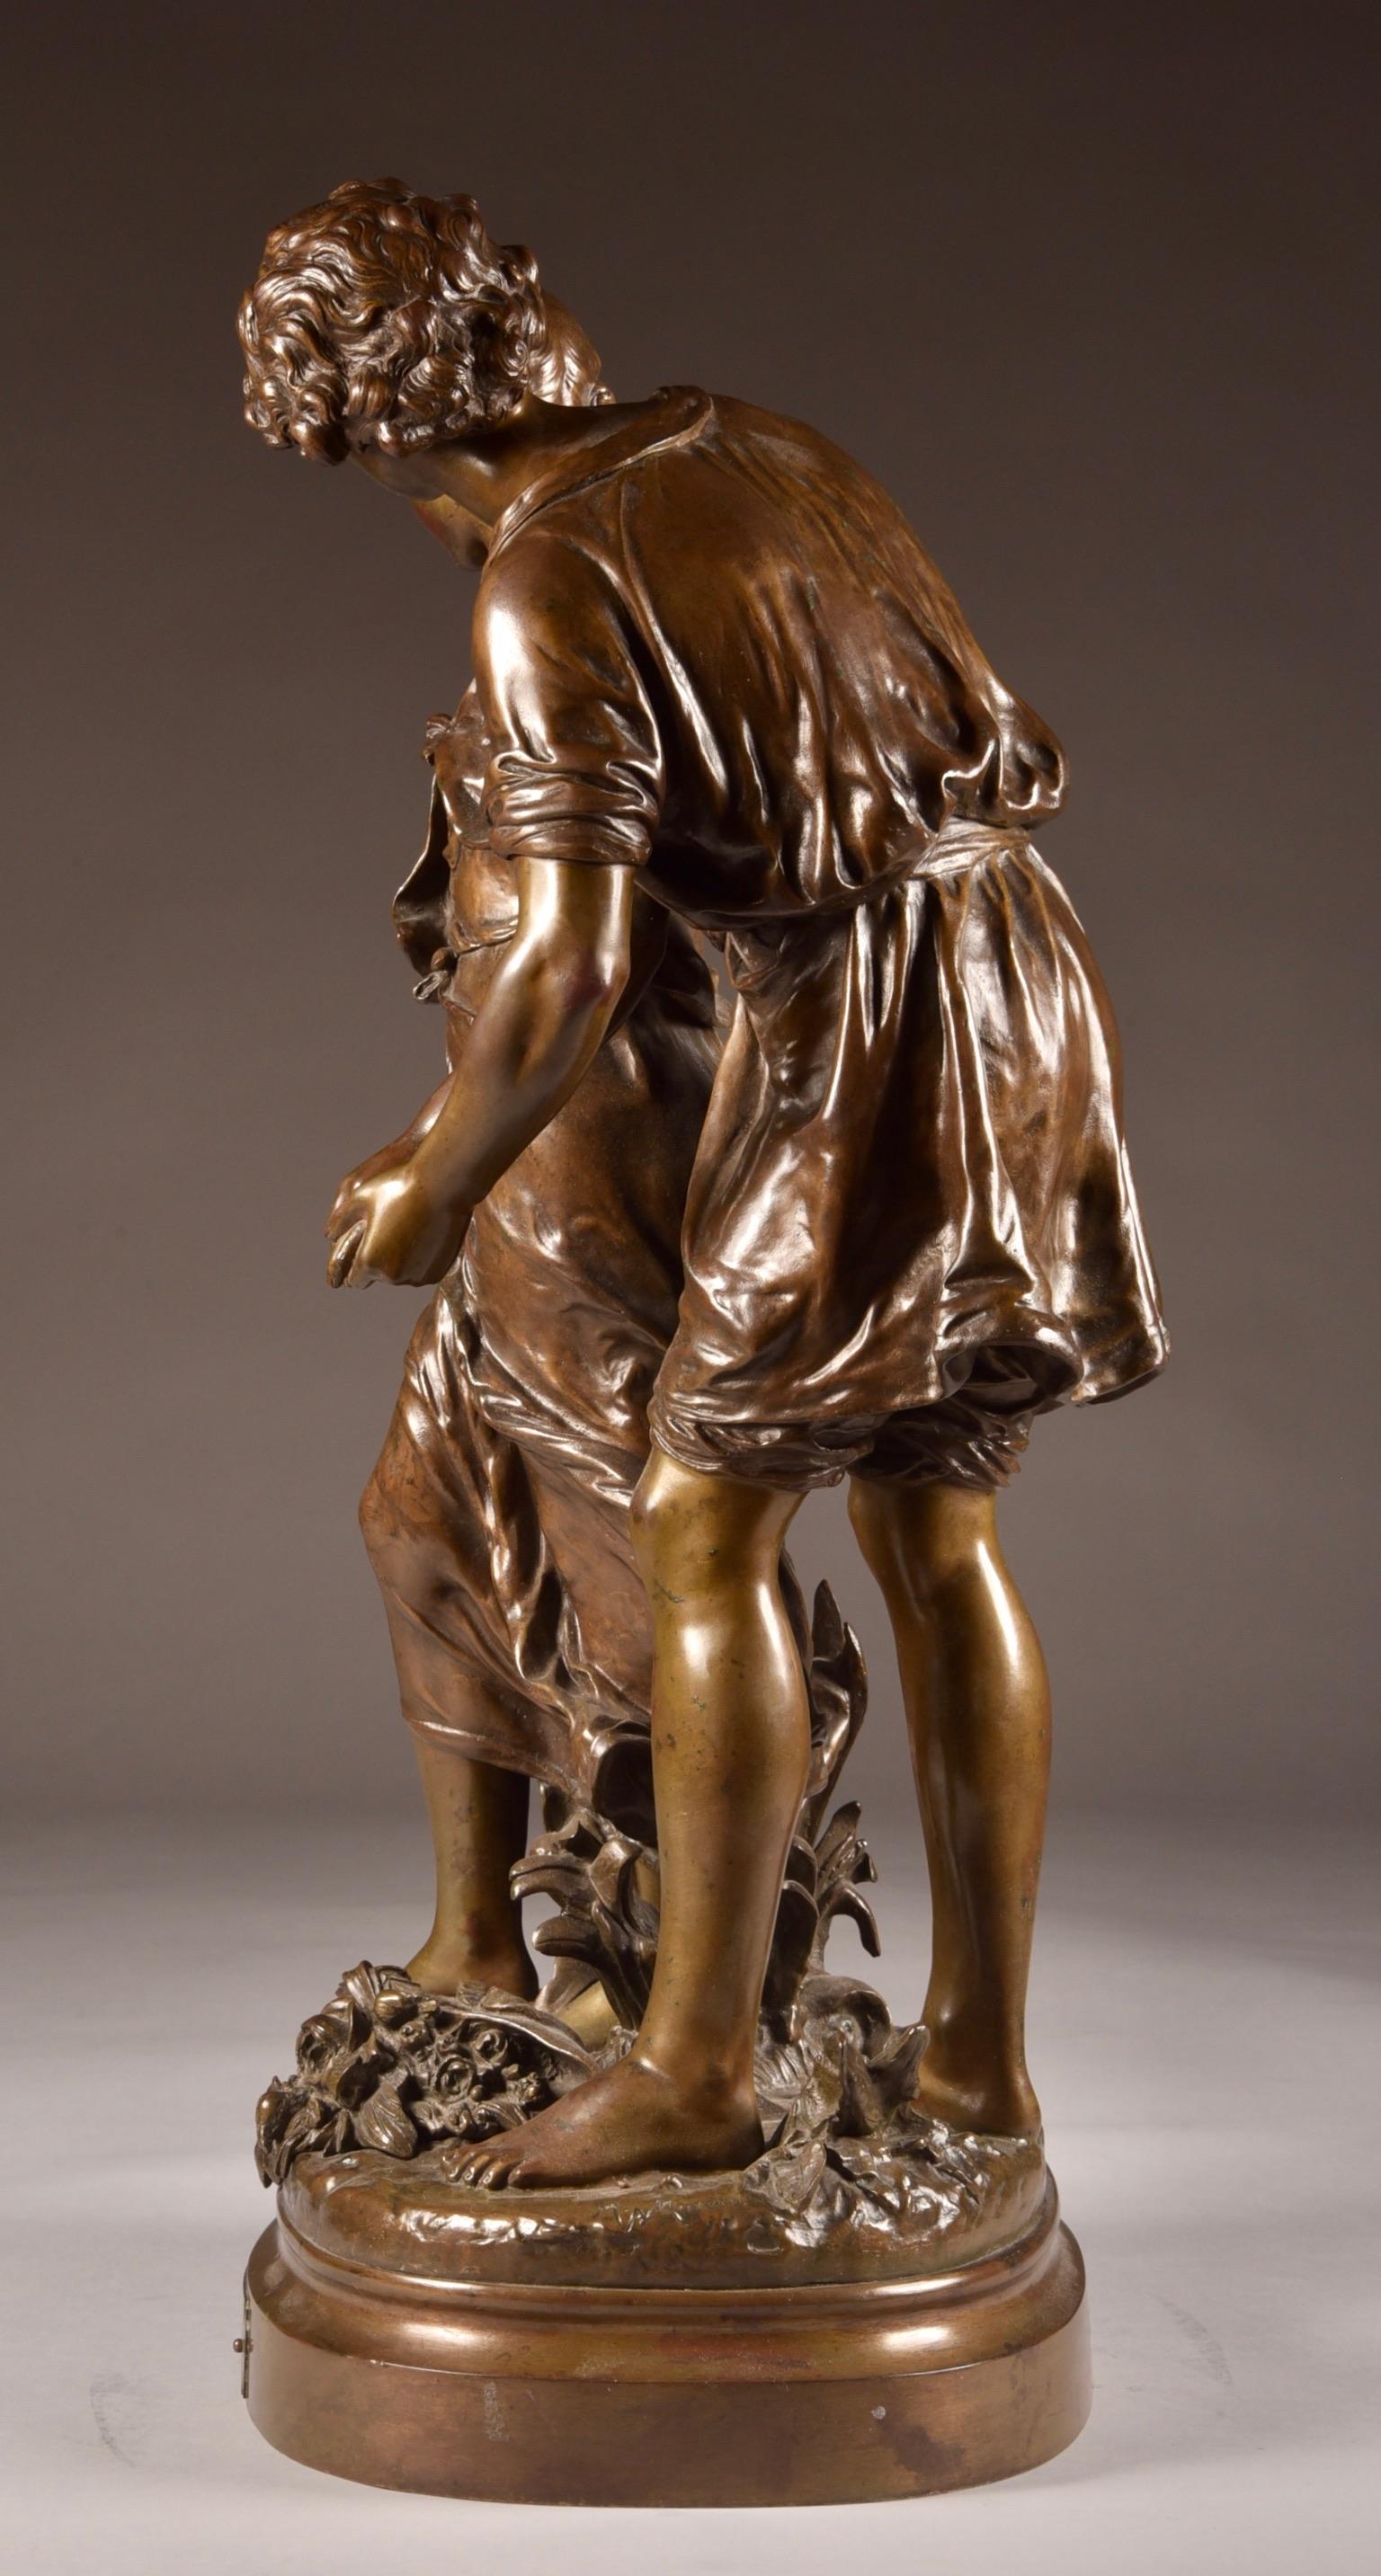 Neoclassical Large Sculpture L'Ave, Hippolyte Moreau, Young Couple in Love, circa 1890